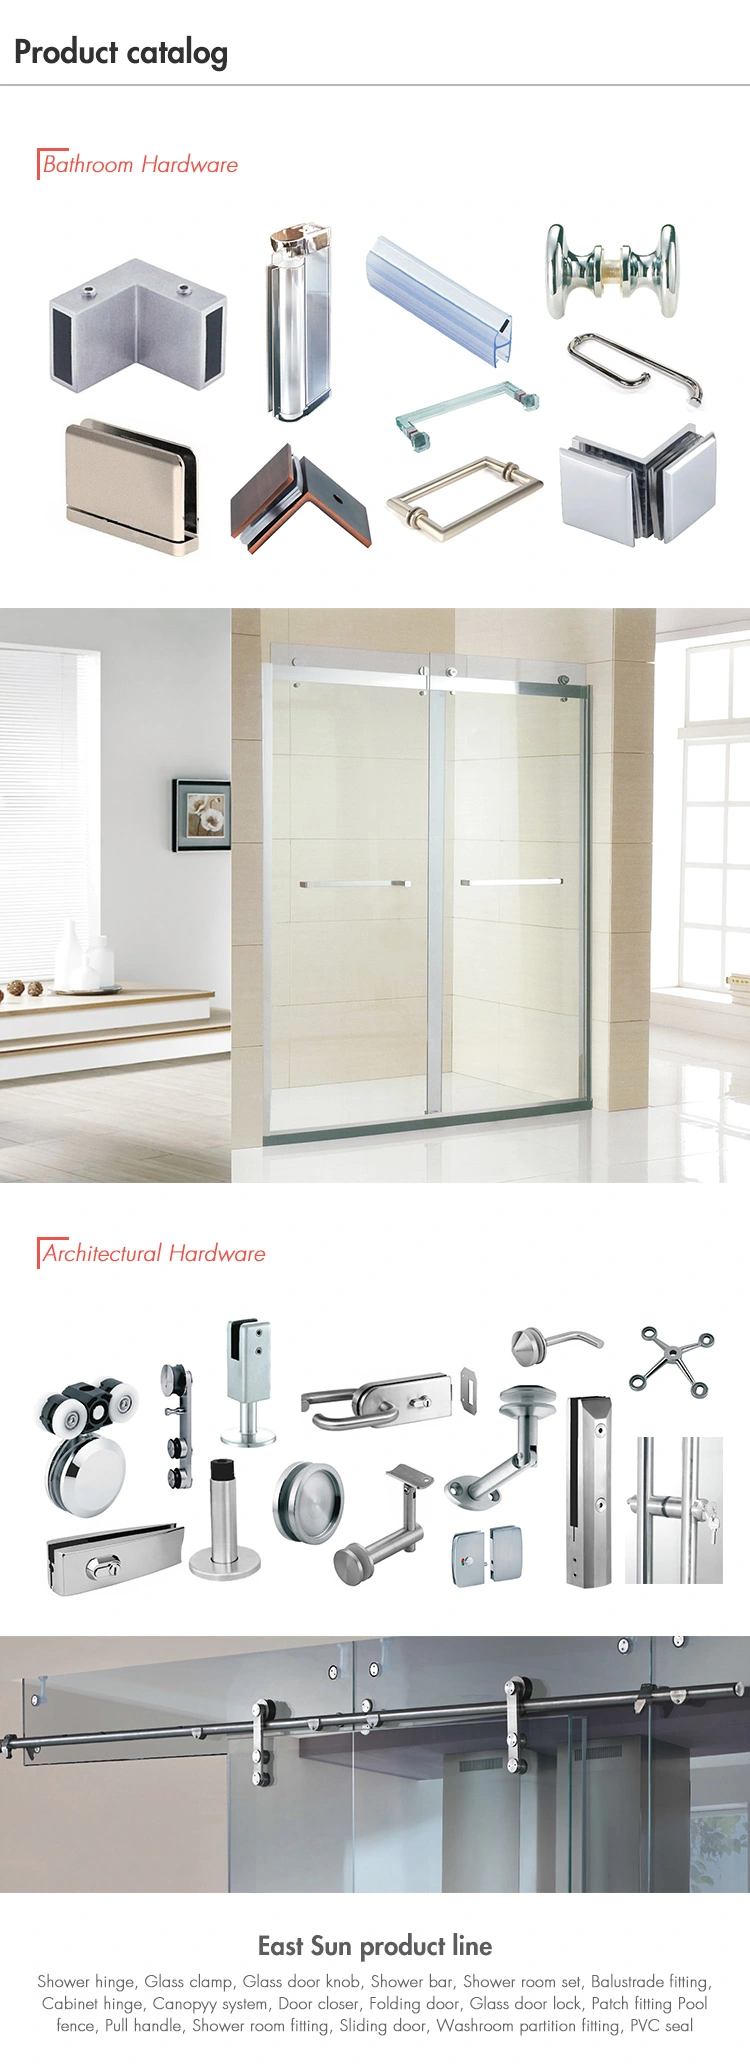 Hot Designs Stainless Steel Shower Rod (SFB-06)